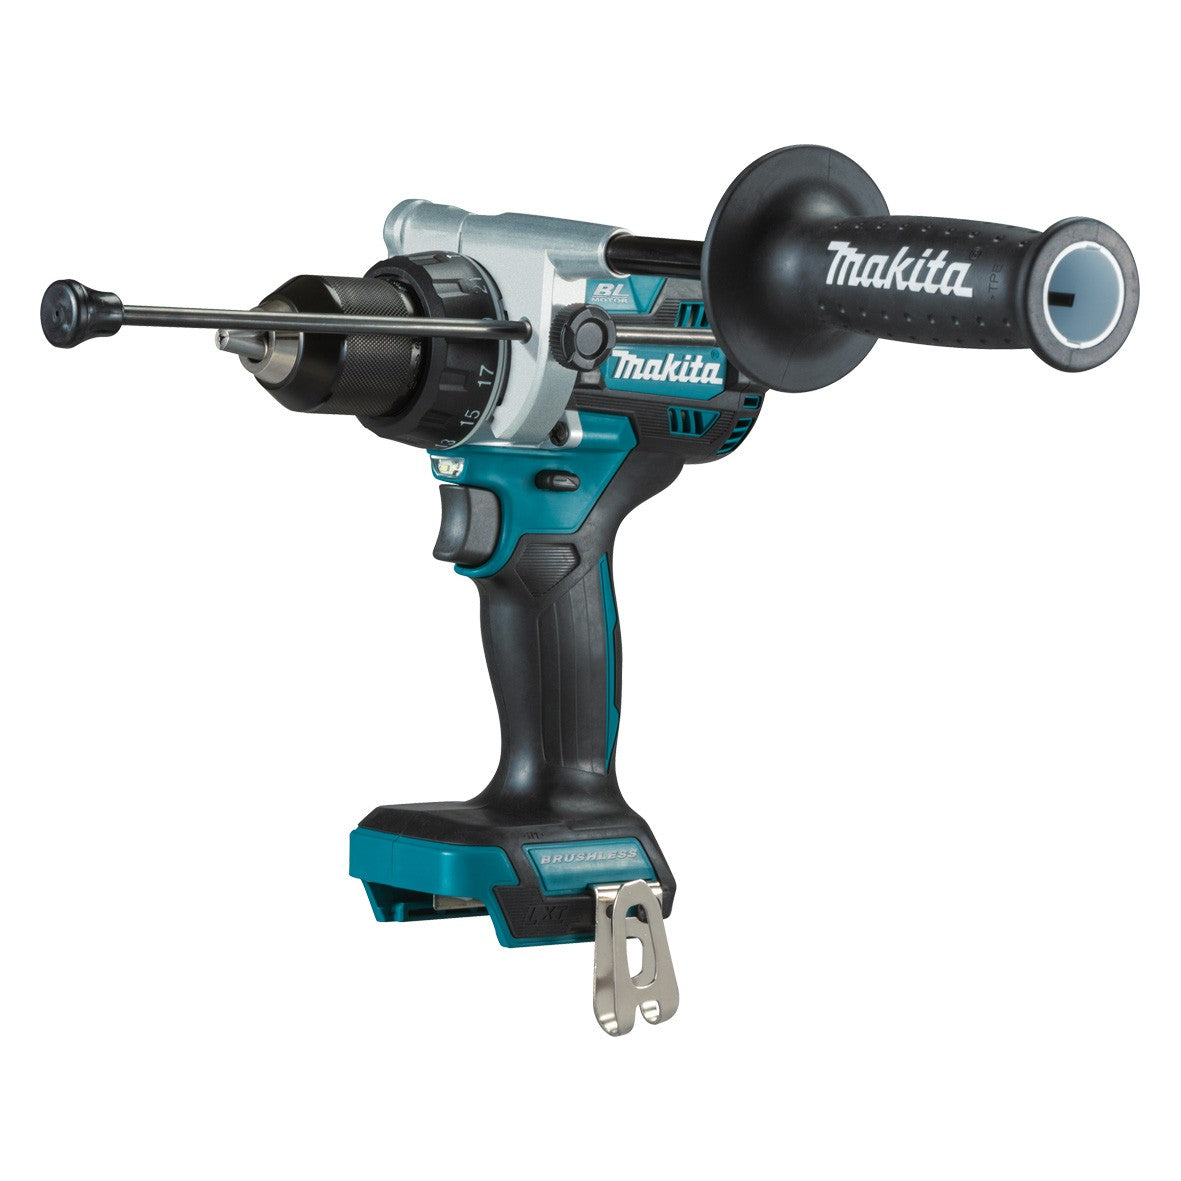 18V Brushless Heavy Duty Hammer Driver Drill Bare (Tool Only) DHP486Z by Makita